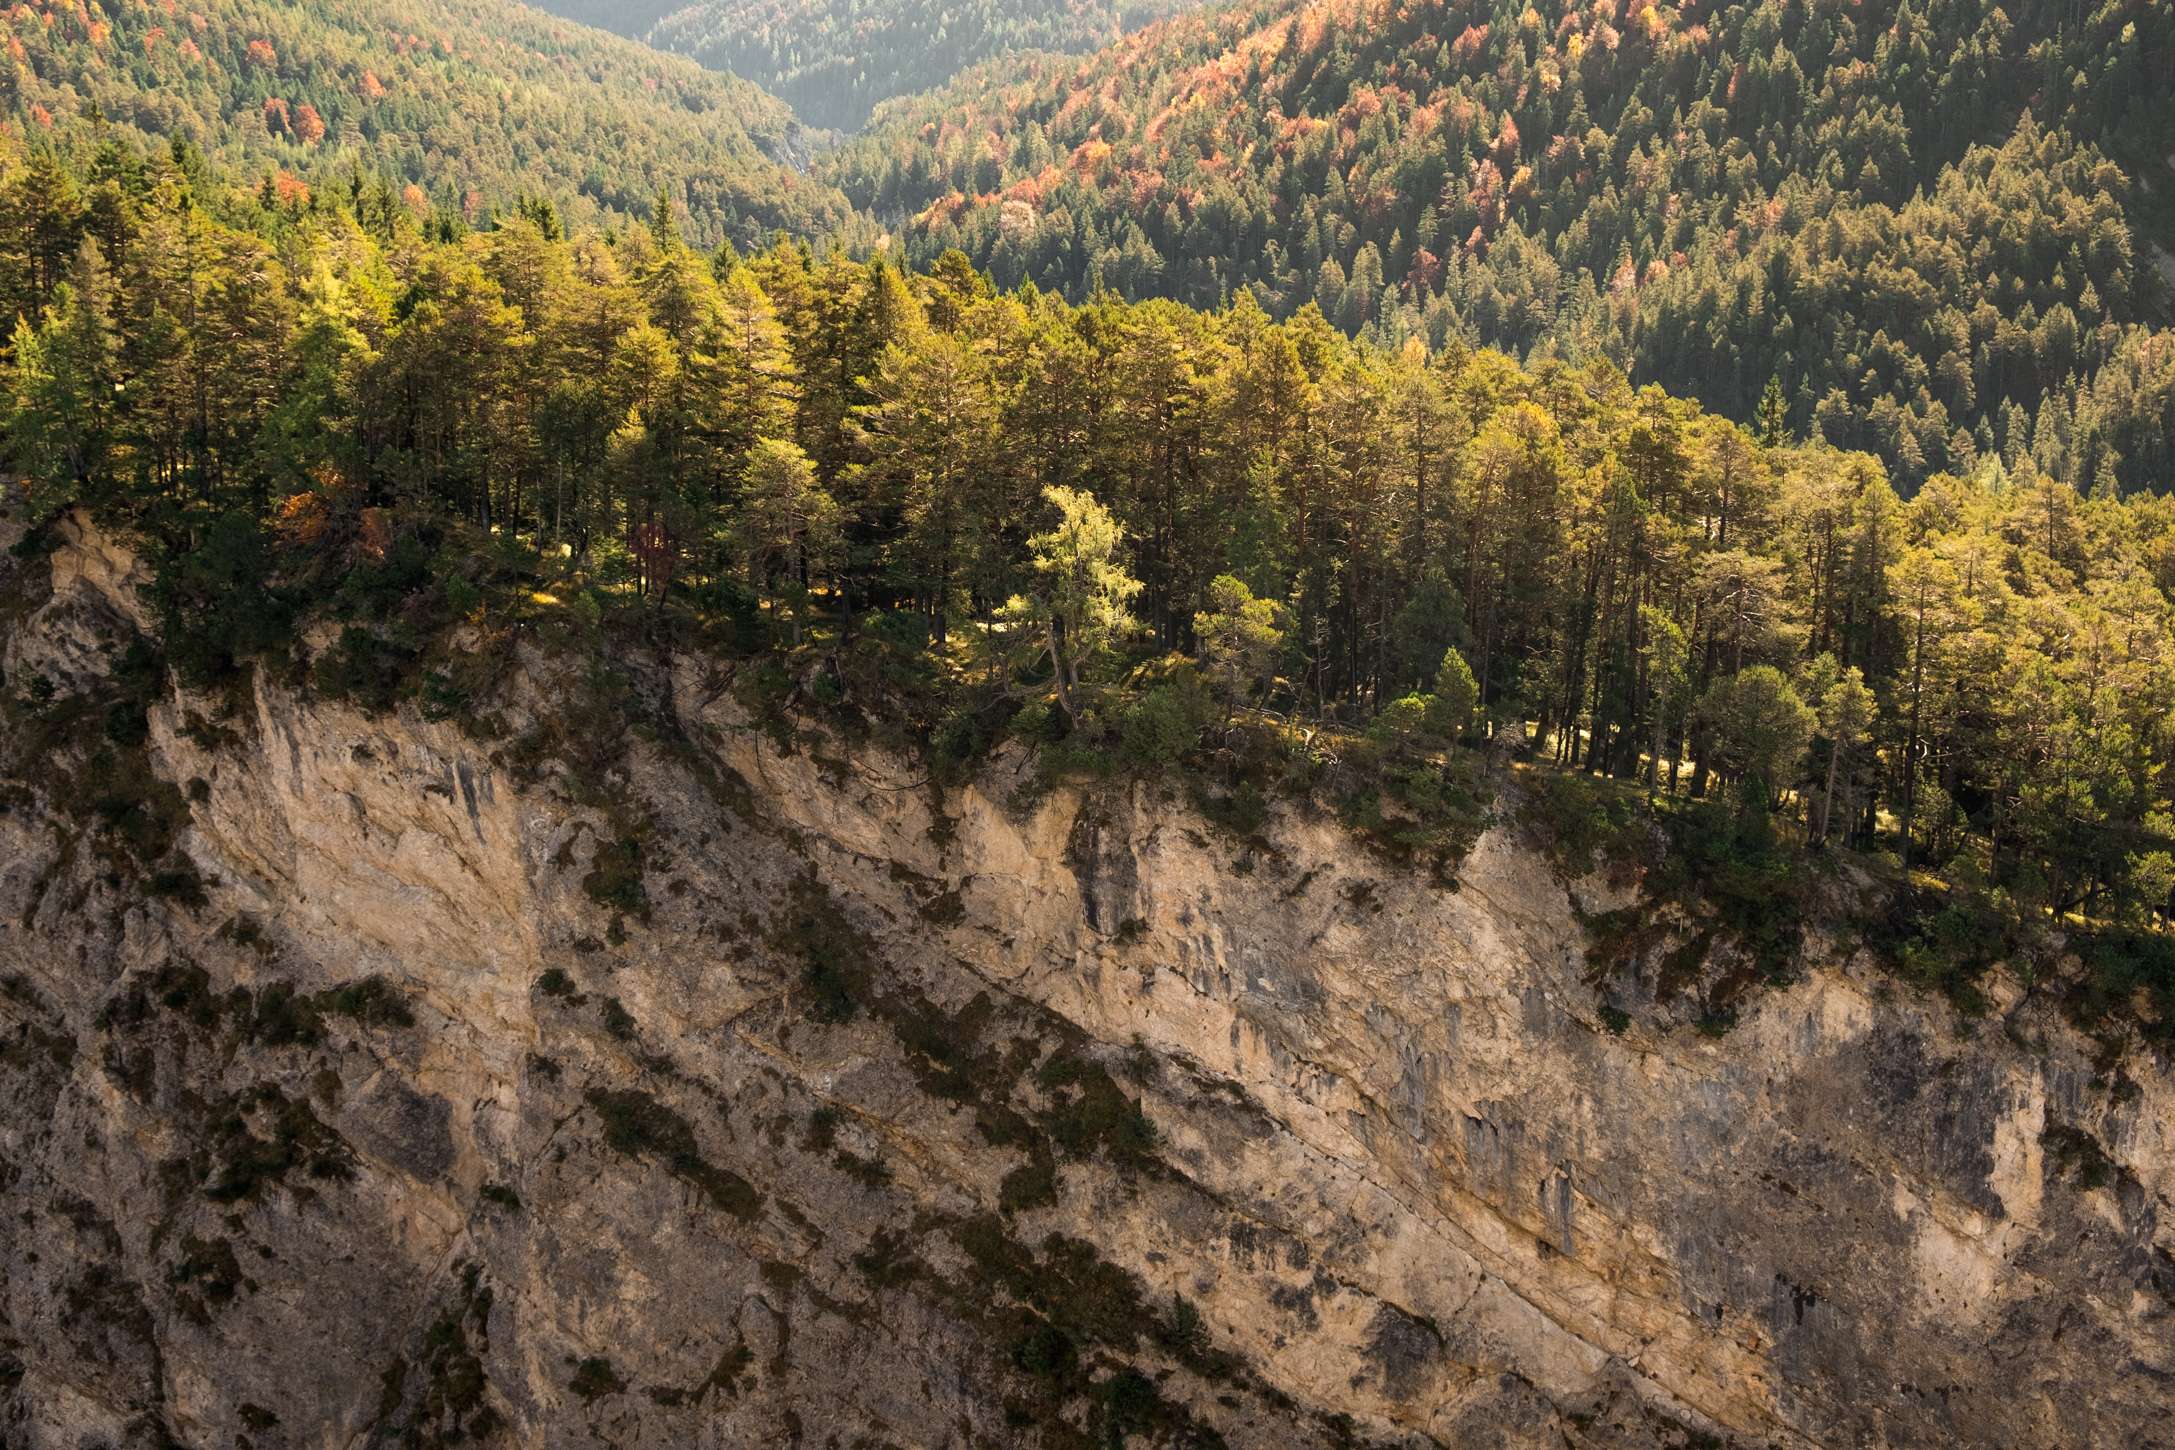 A high river gorge in the Karwendel with sheer open rock face. Forests cover the top of the endless landscape.